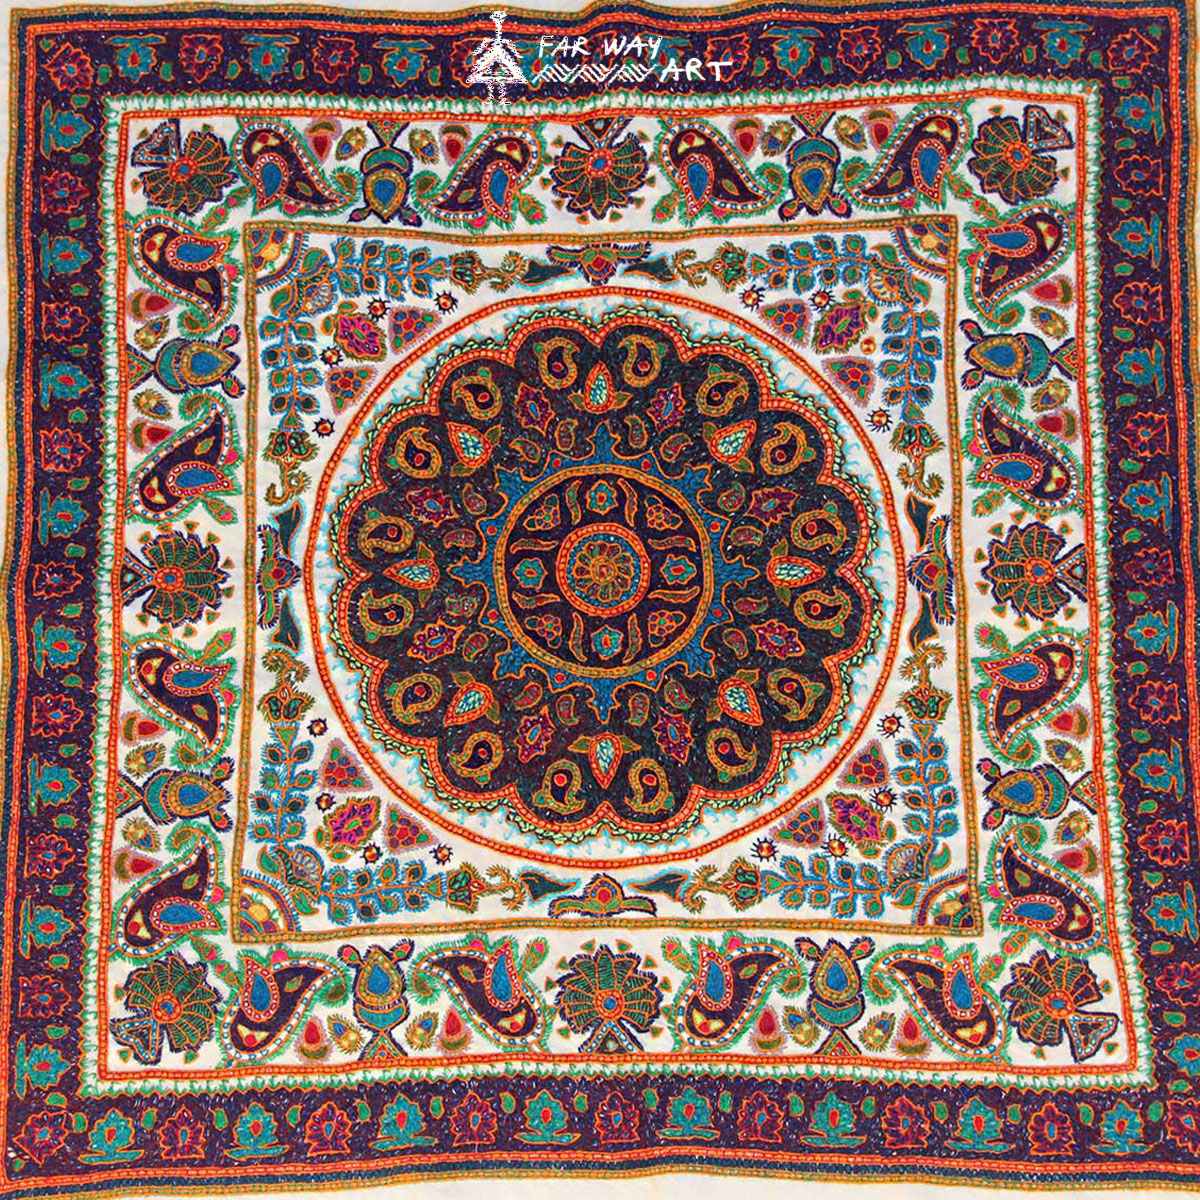 Persian Embroidery Patterns Mandalas In Persian Ethnic Art Crafts And Textiles Blog Far